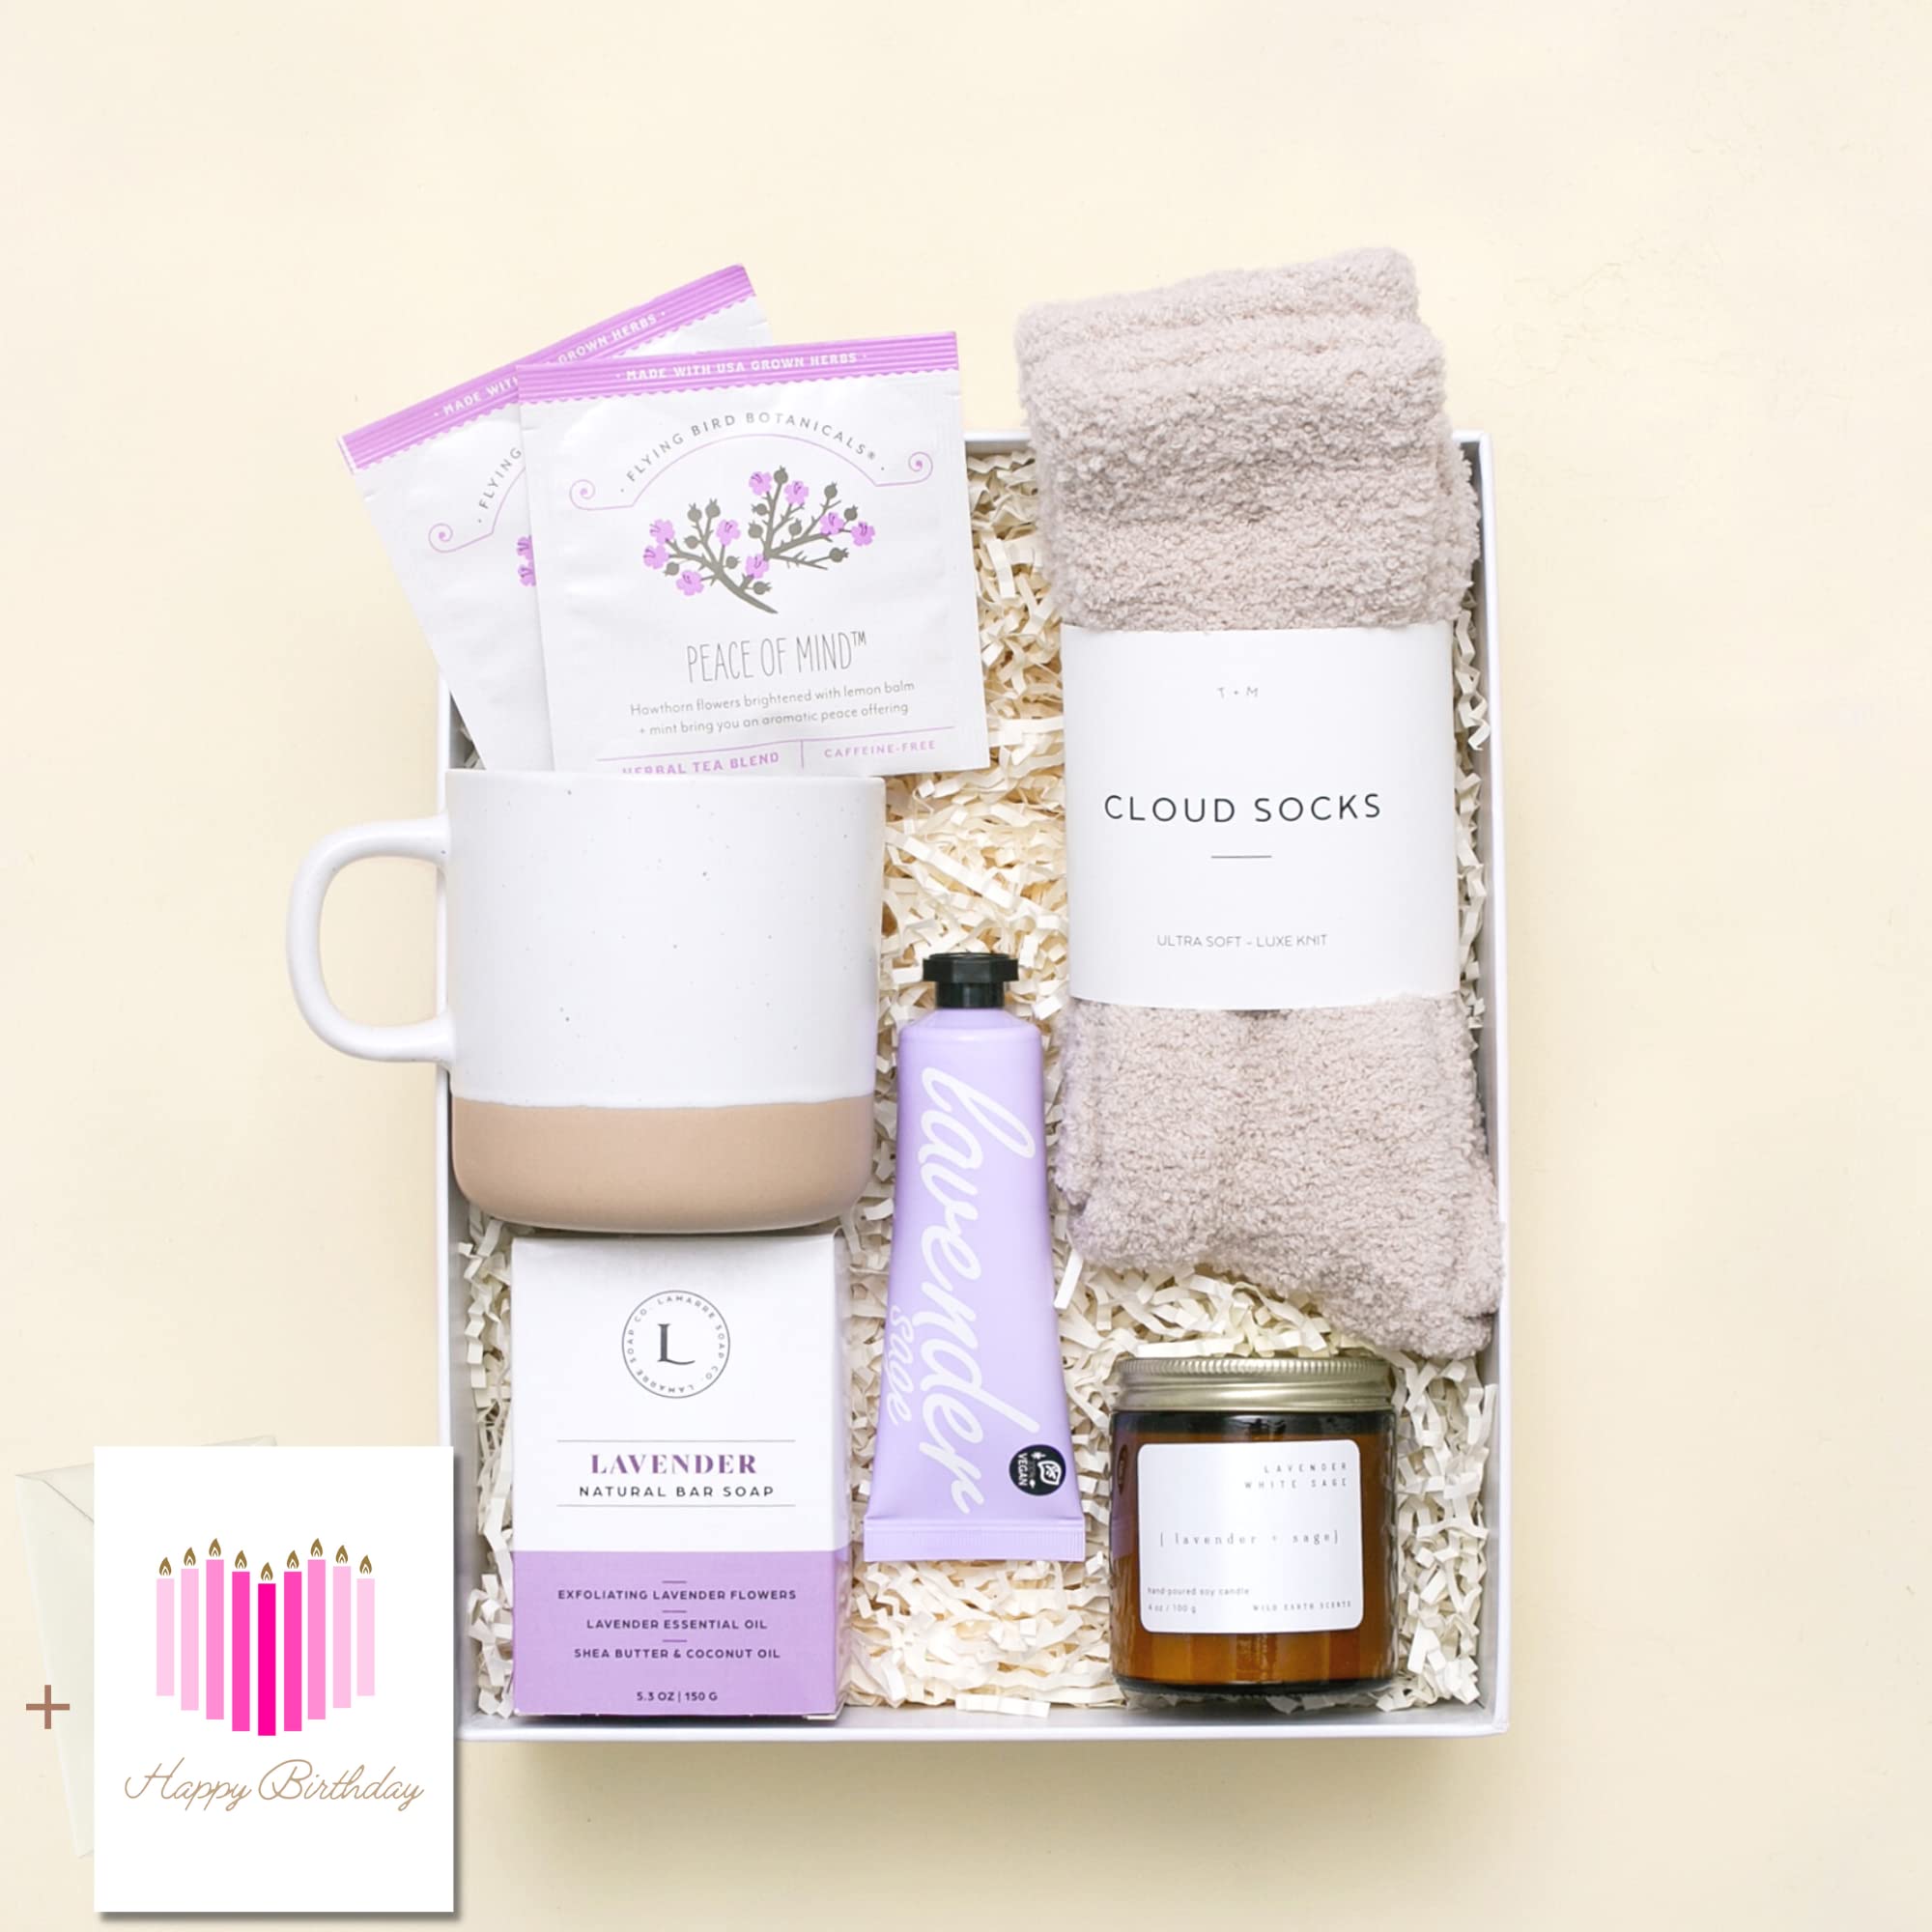 Buy Self Care Kit, Women Gifts For Christmas - Get Well Soon Gift Baskets  For Women, Relaxation Gifts For Women, Self Care Gifts, Self Care Package  For Women - Spa Gift Sets